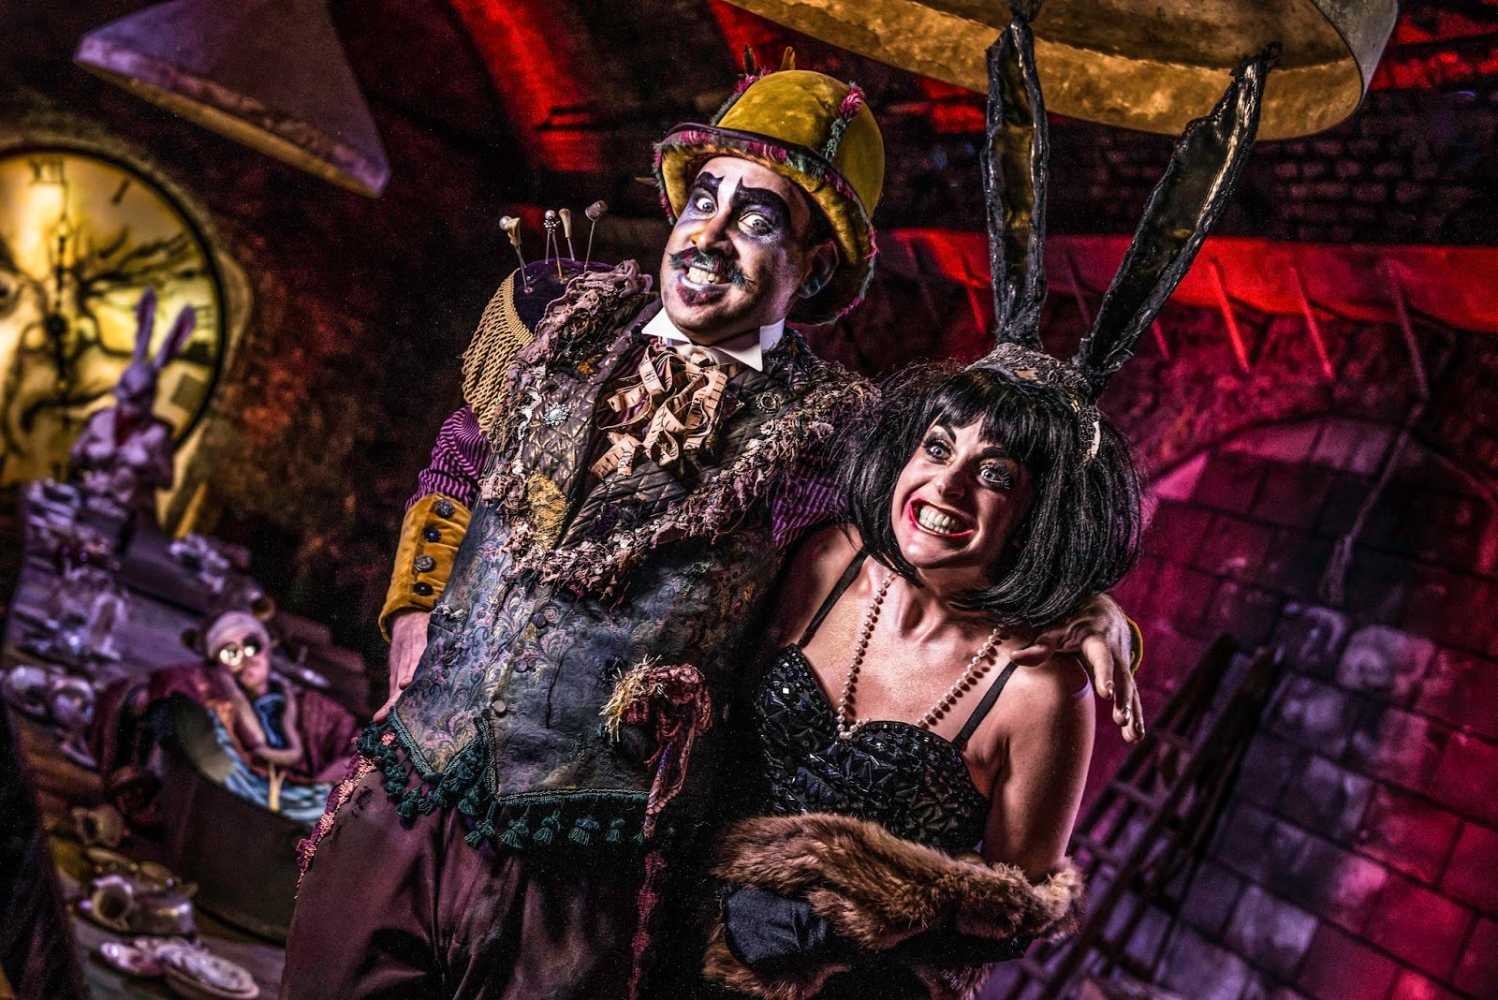 Audience members can meet some of Wonderland’s most famous and curious inhabitants (photo: Rah Petherbridge Photography)